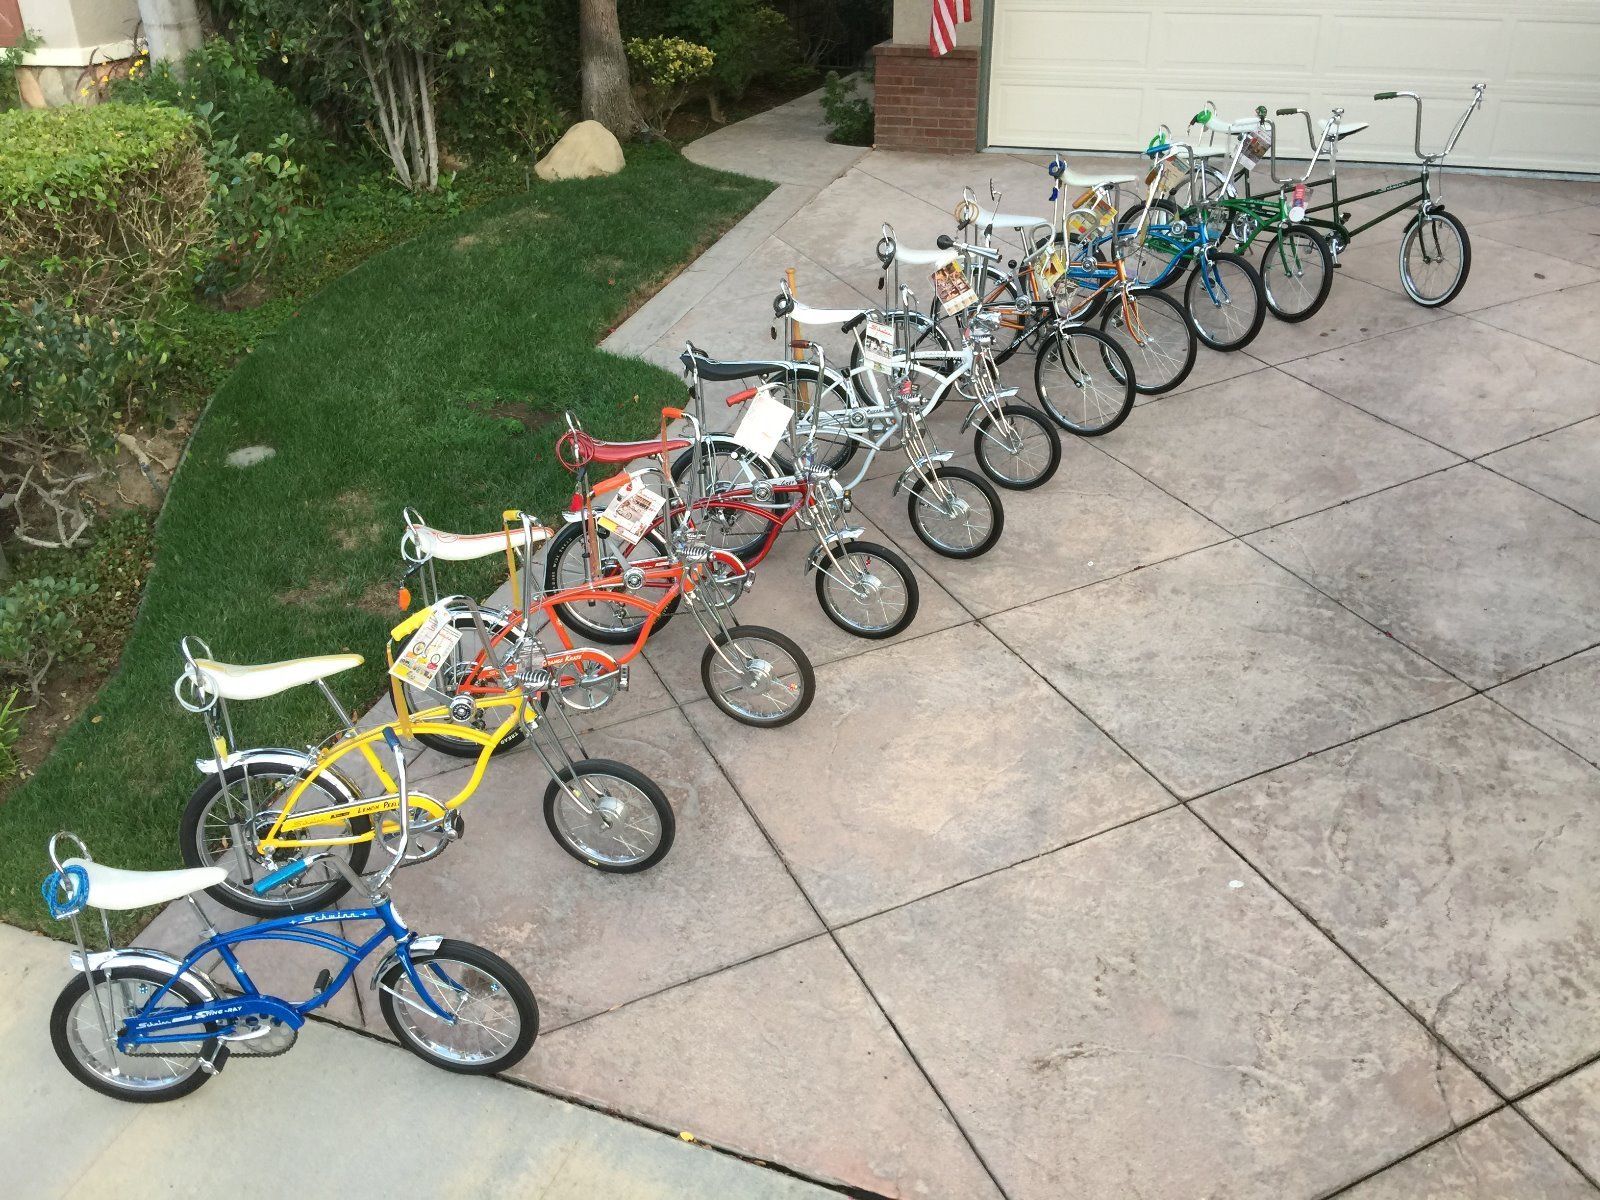 Check Out This Incredibly Collection Of Schwinn Stingrays And More For Sale!